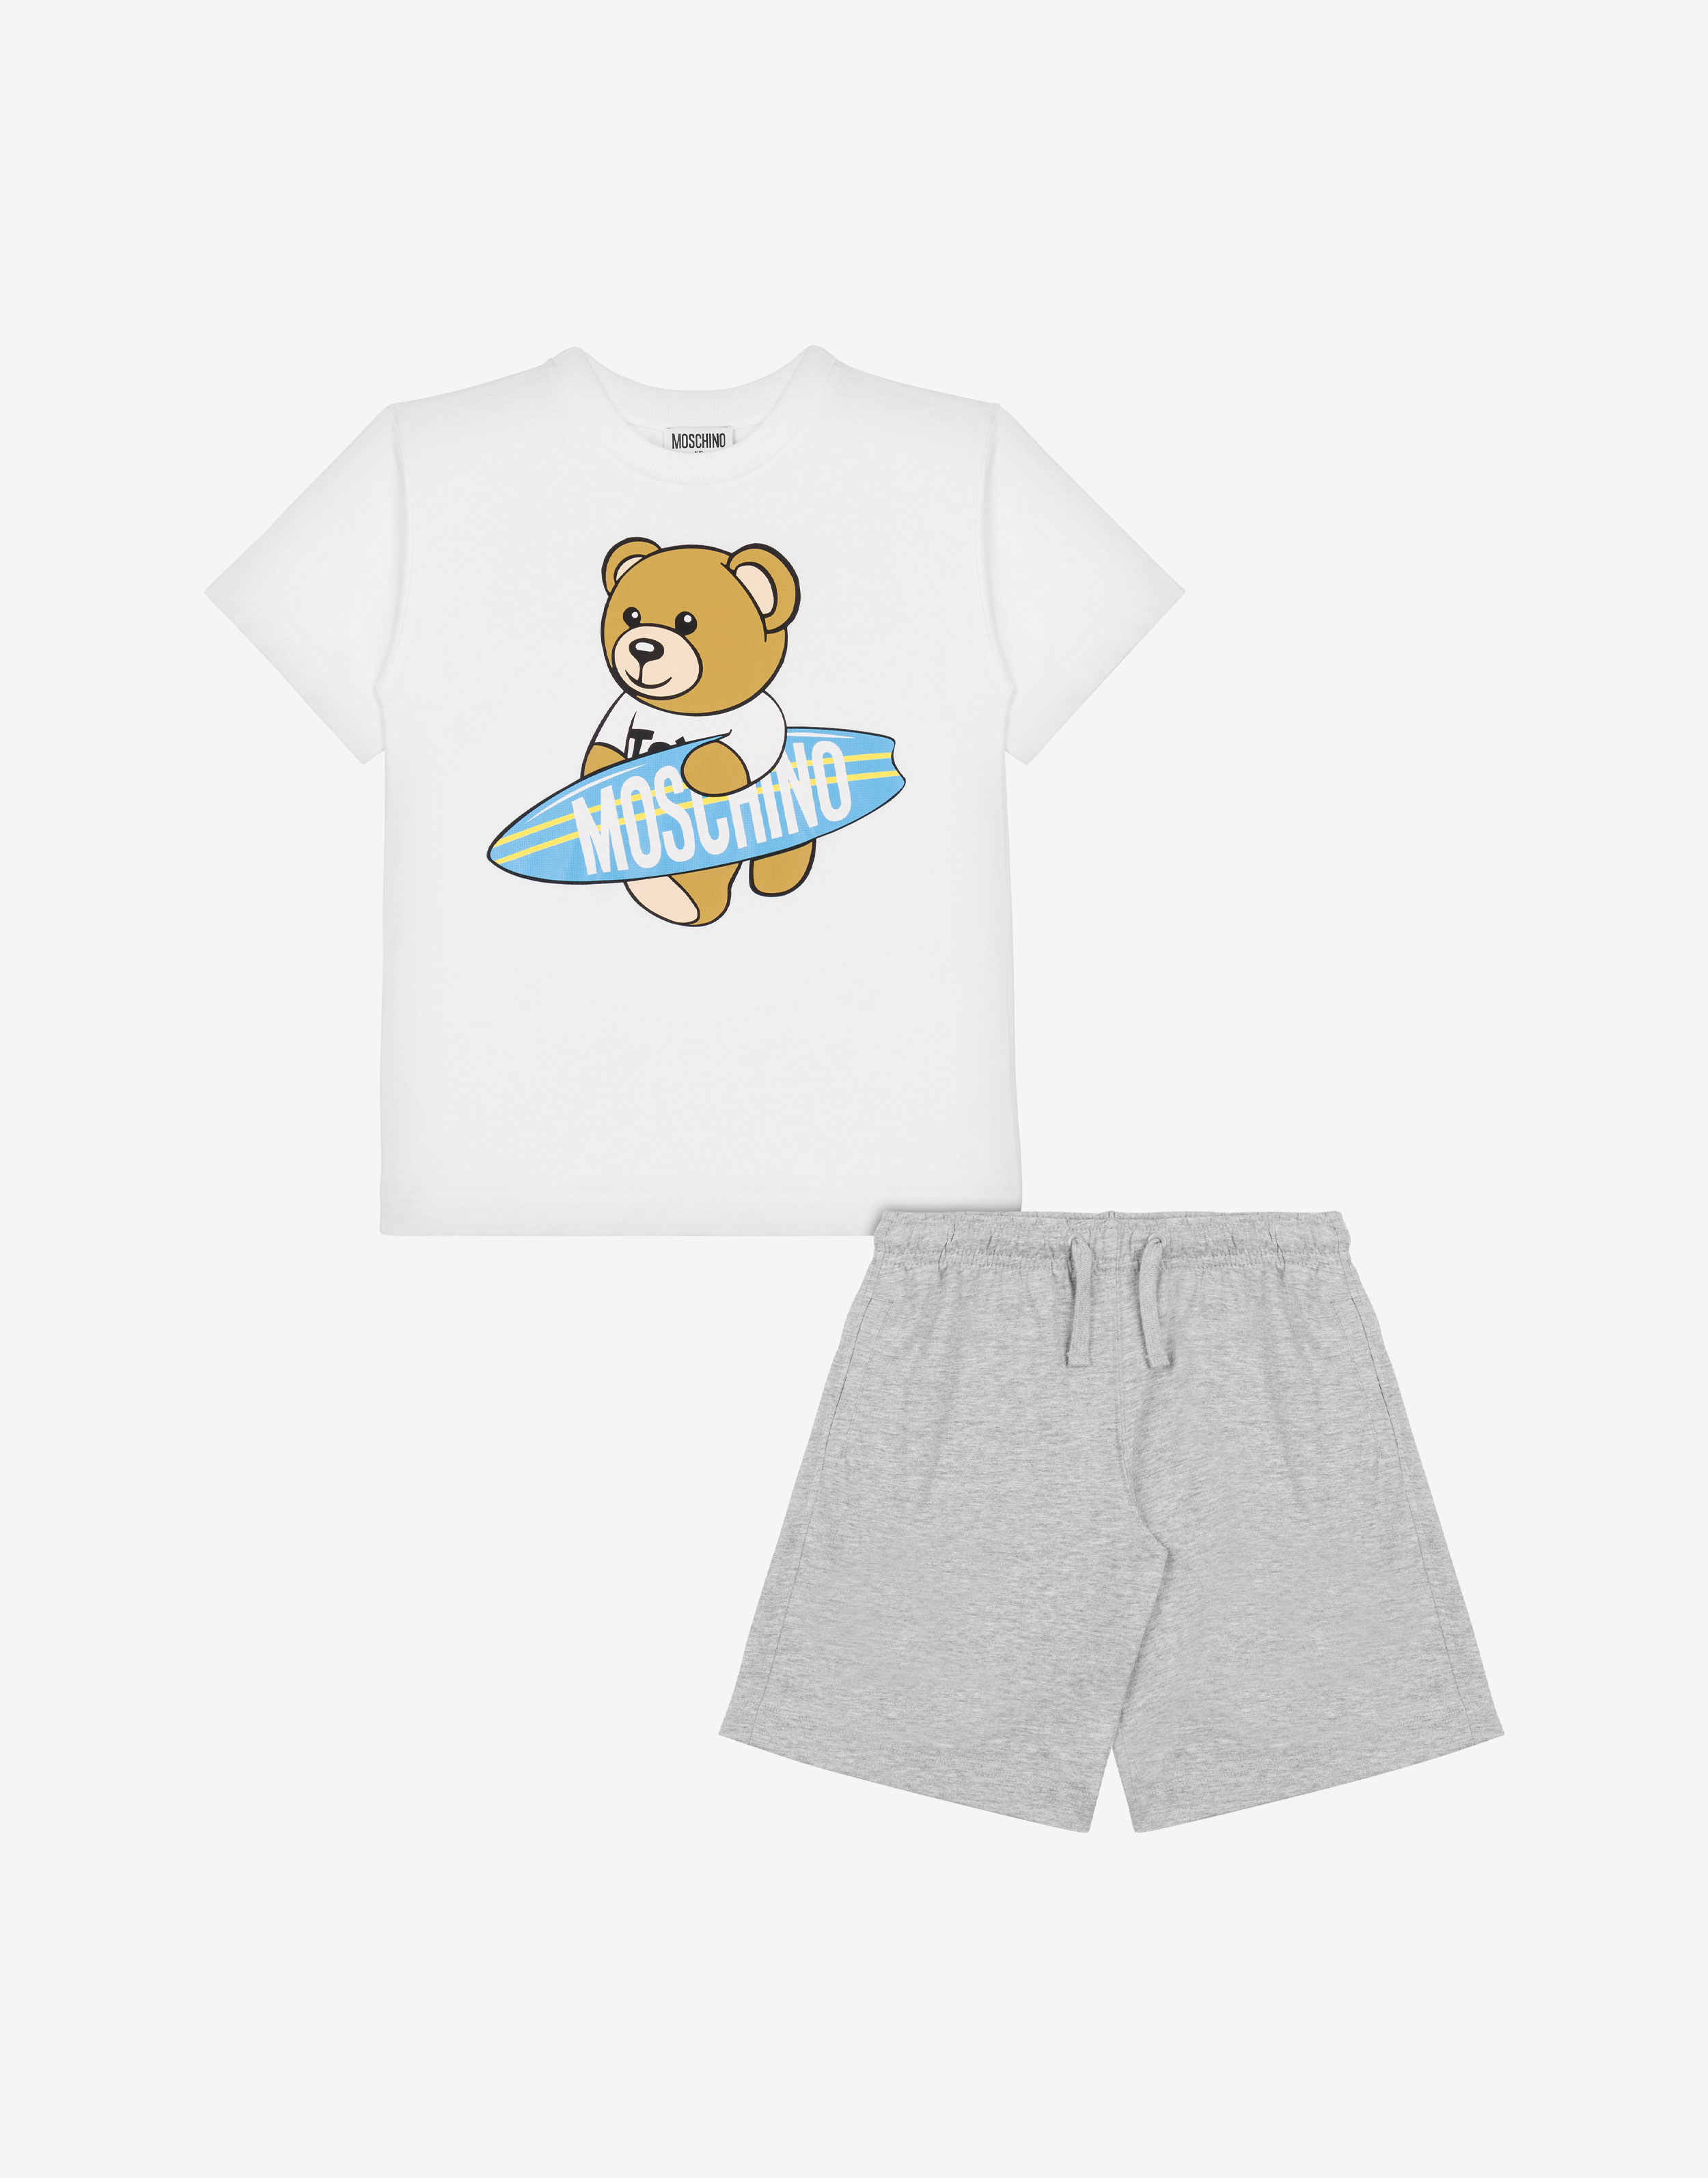 Surfer Teddy Bear T-shirt and shorts co-ord set